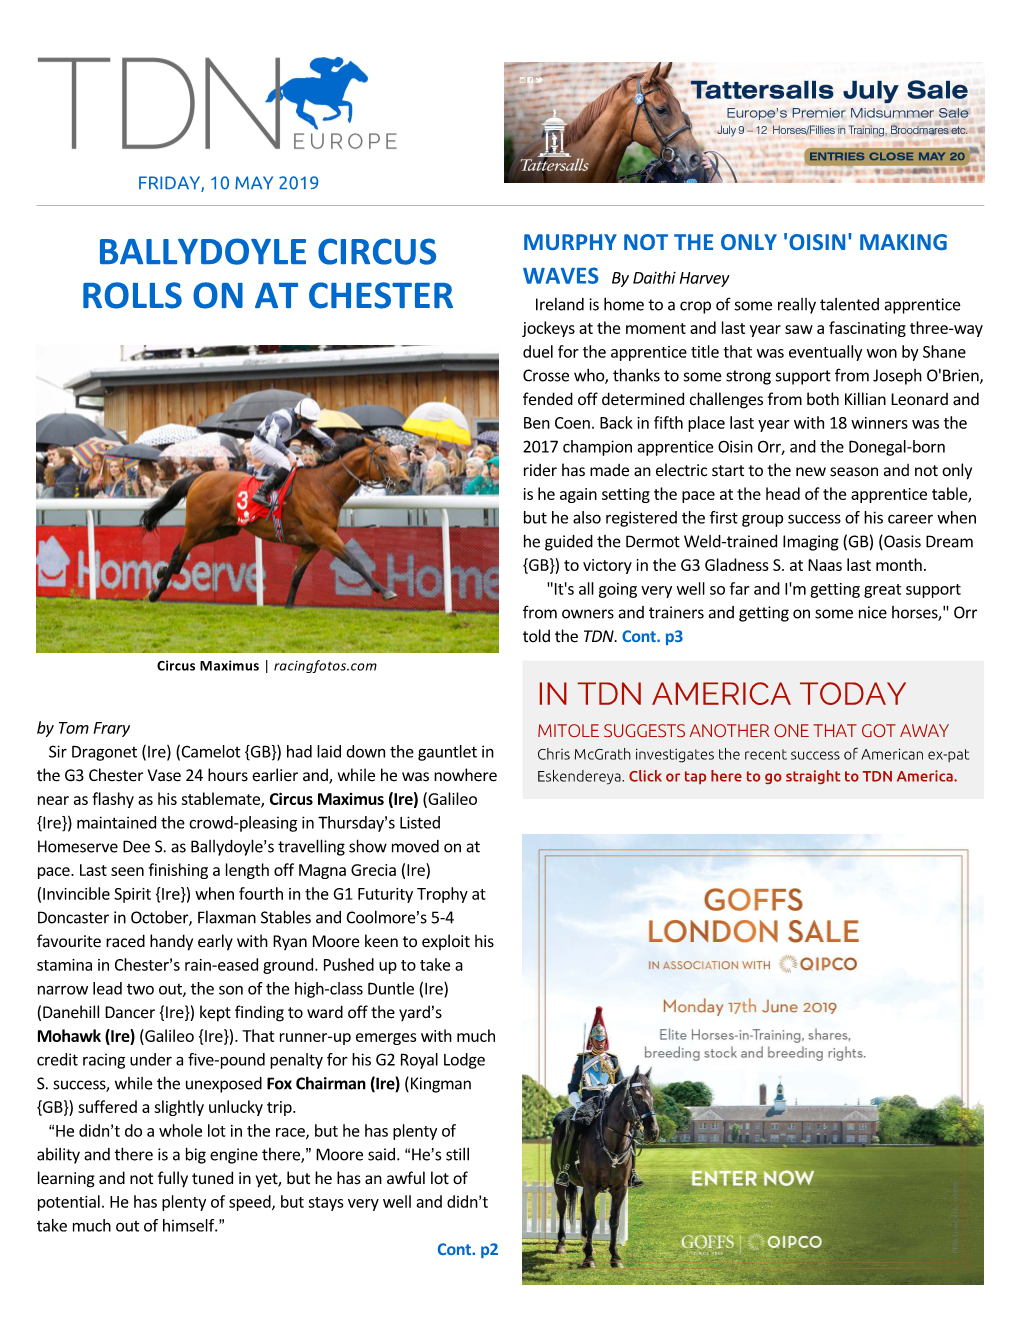 Ballydoyle Circus Rolls on at Chester